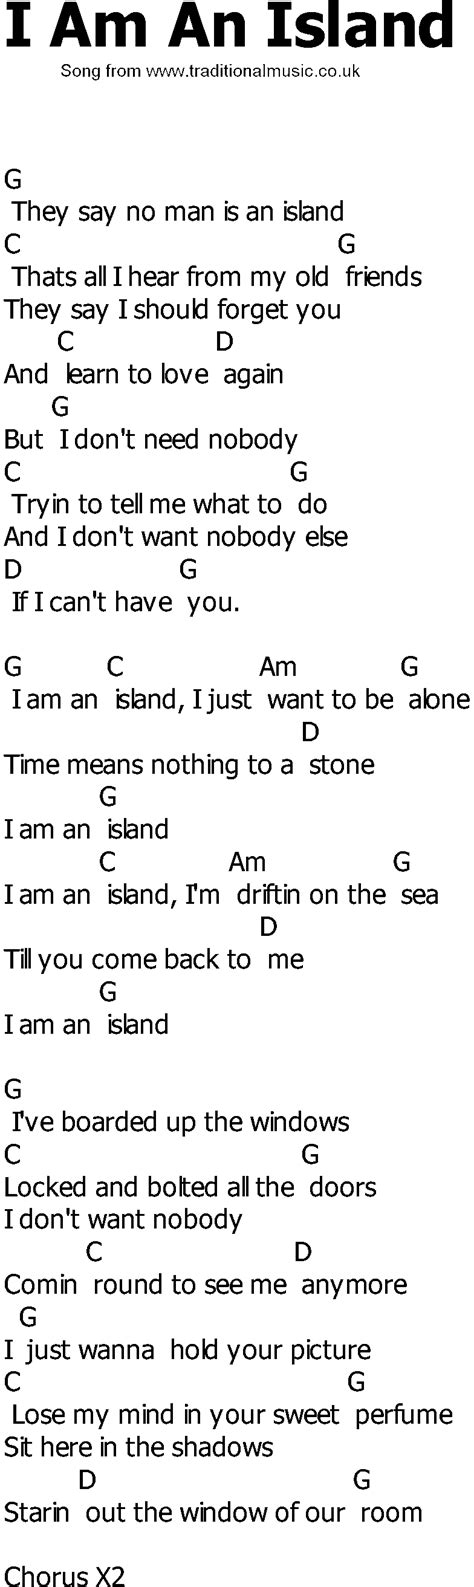 Old Country Song Lyrics With Chords I Am An Island